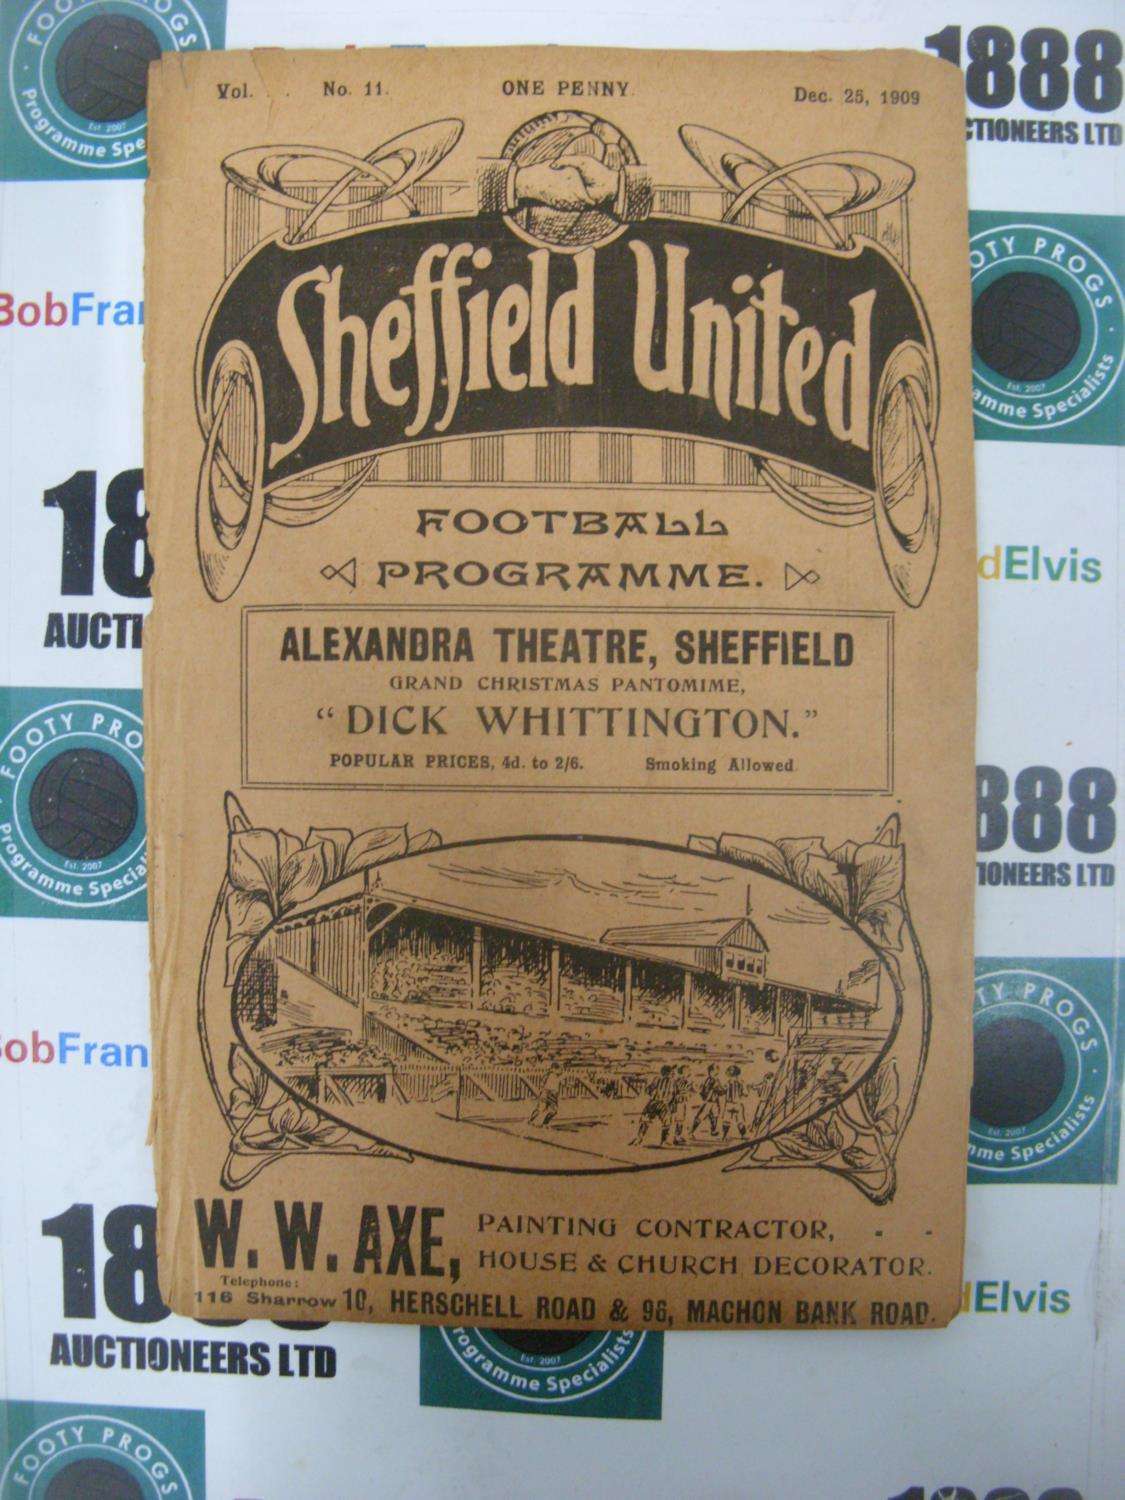 SHEFFIELD UNITED, 1909/1910, a football programme from the fixture versus Aston